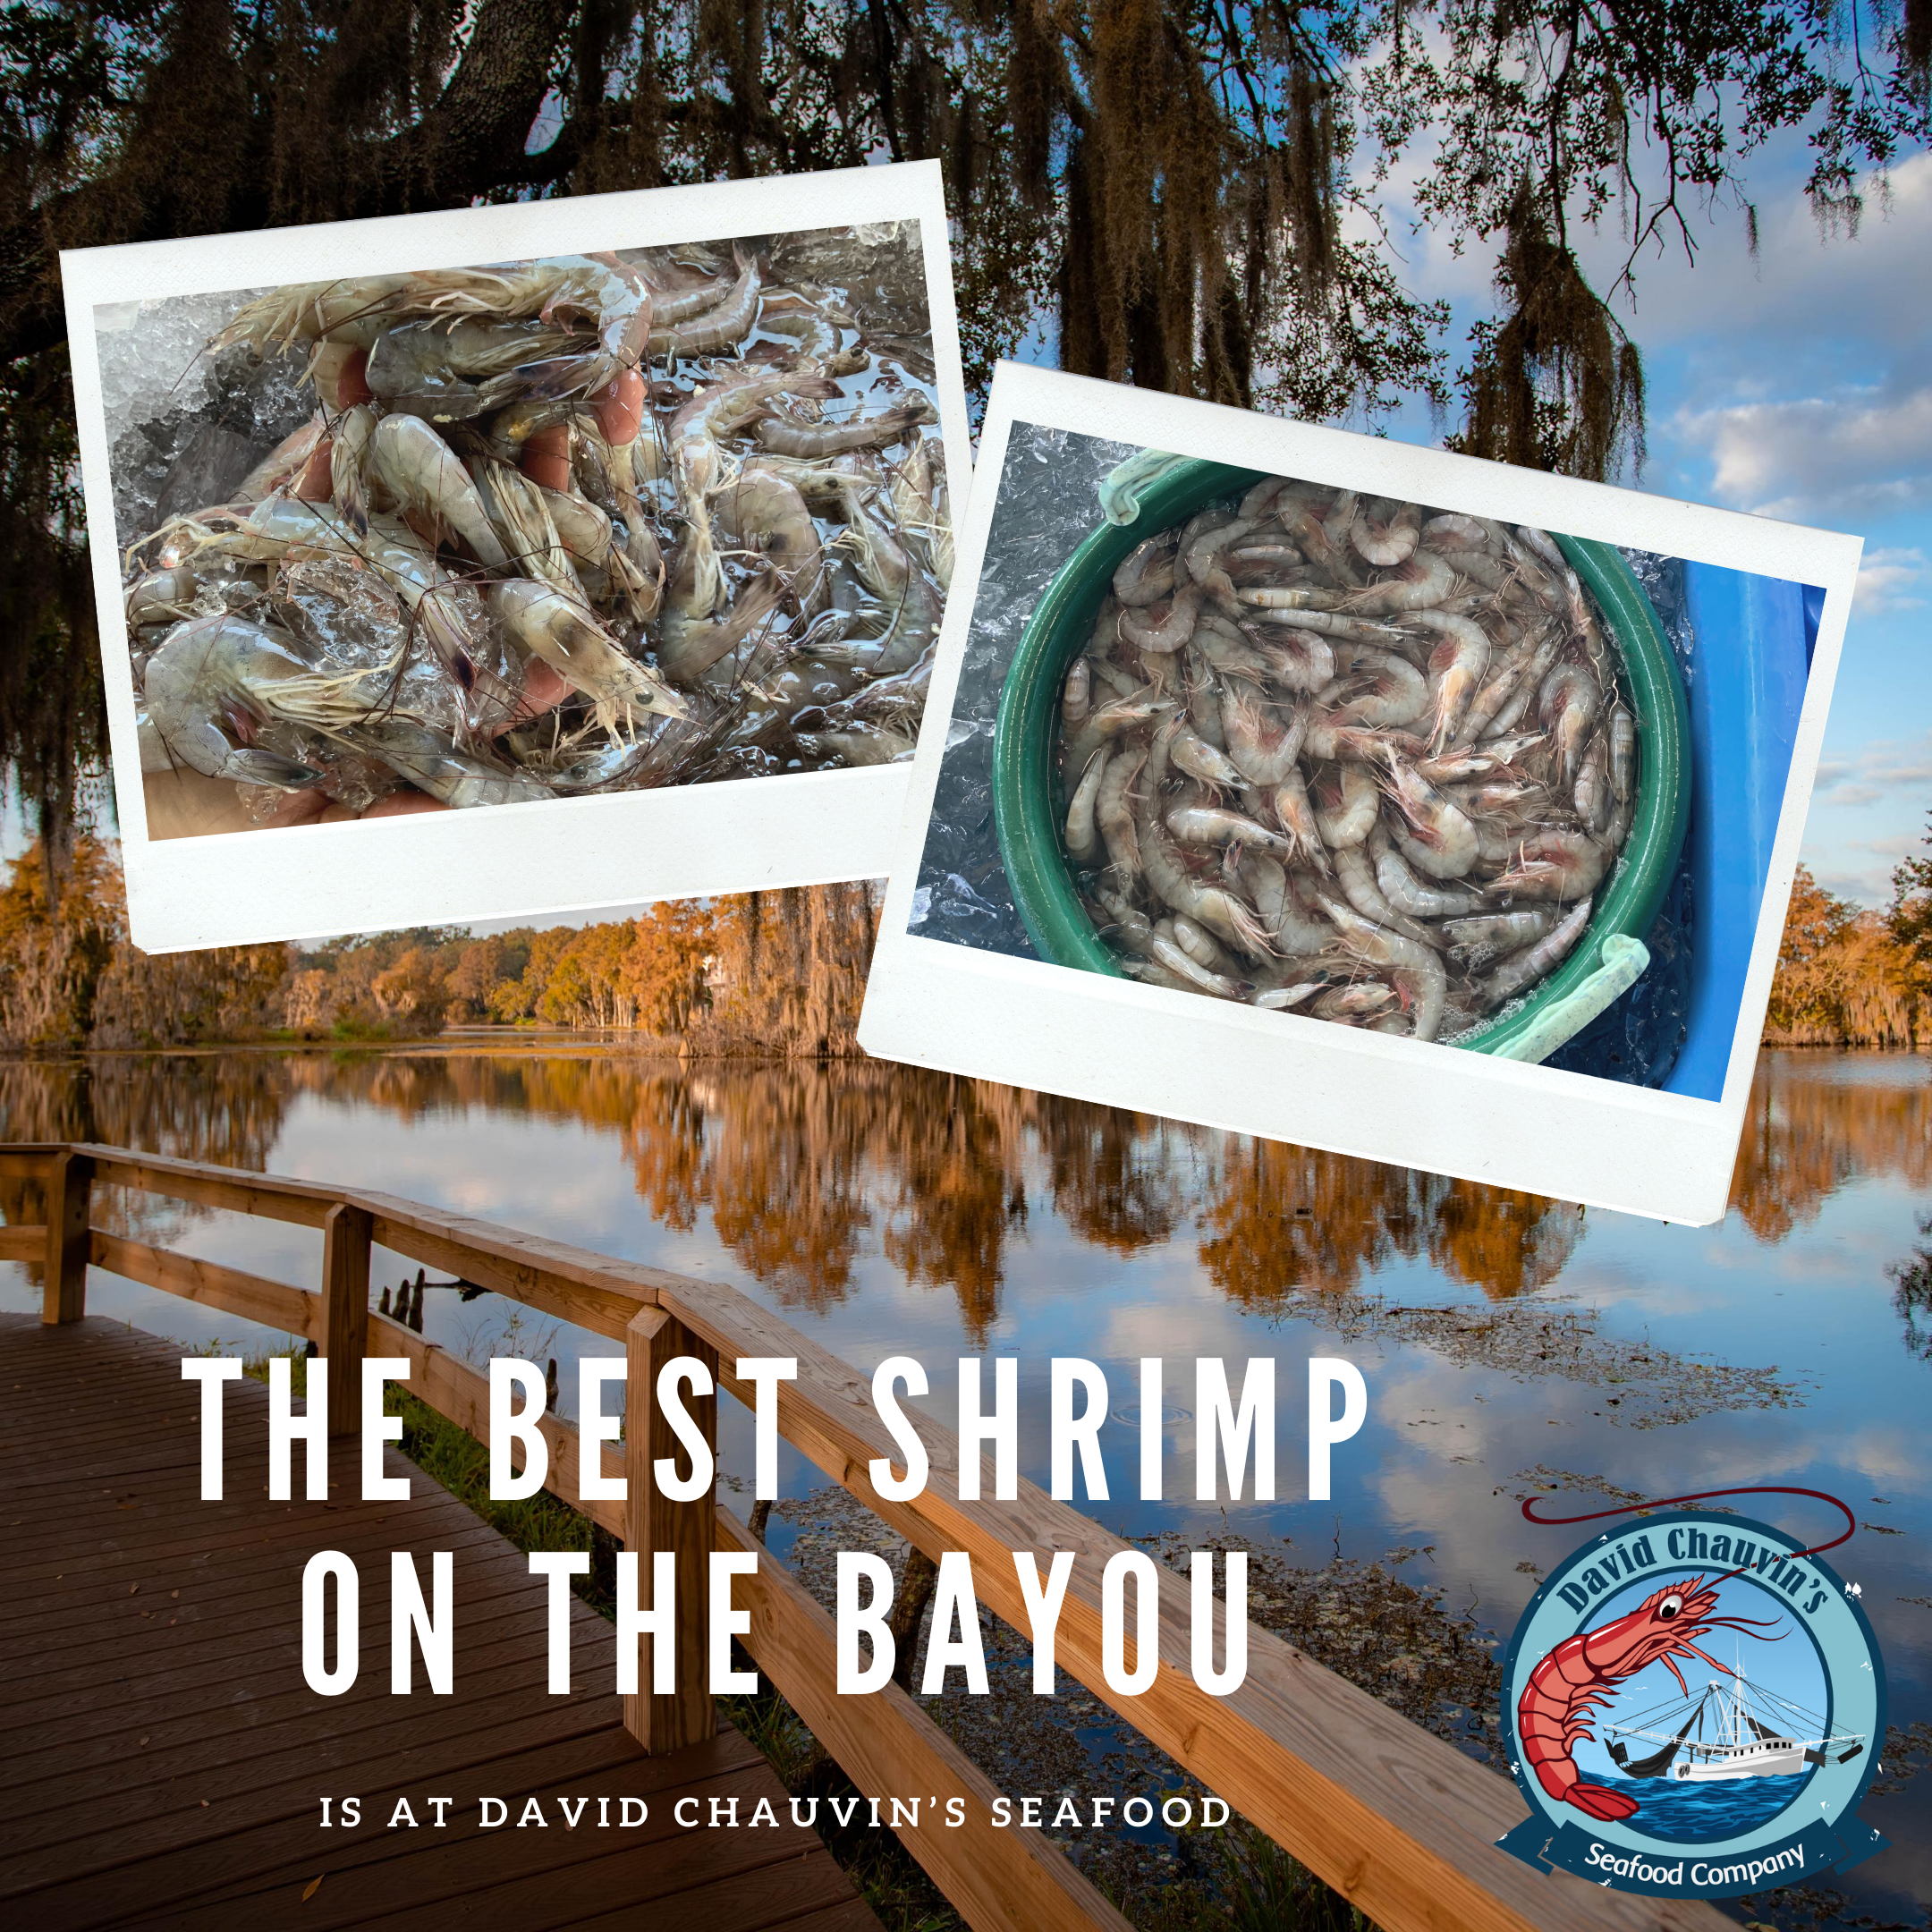 Time To Get Your Share Of Fresh Louisiana Shrimp